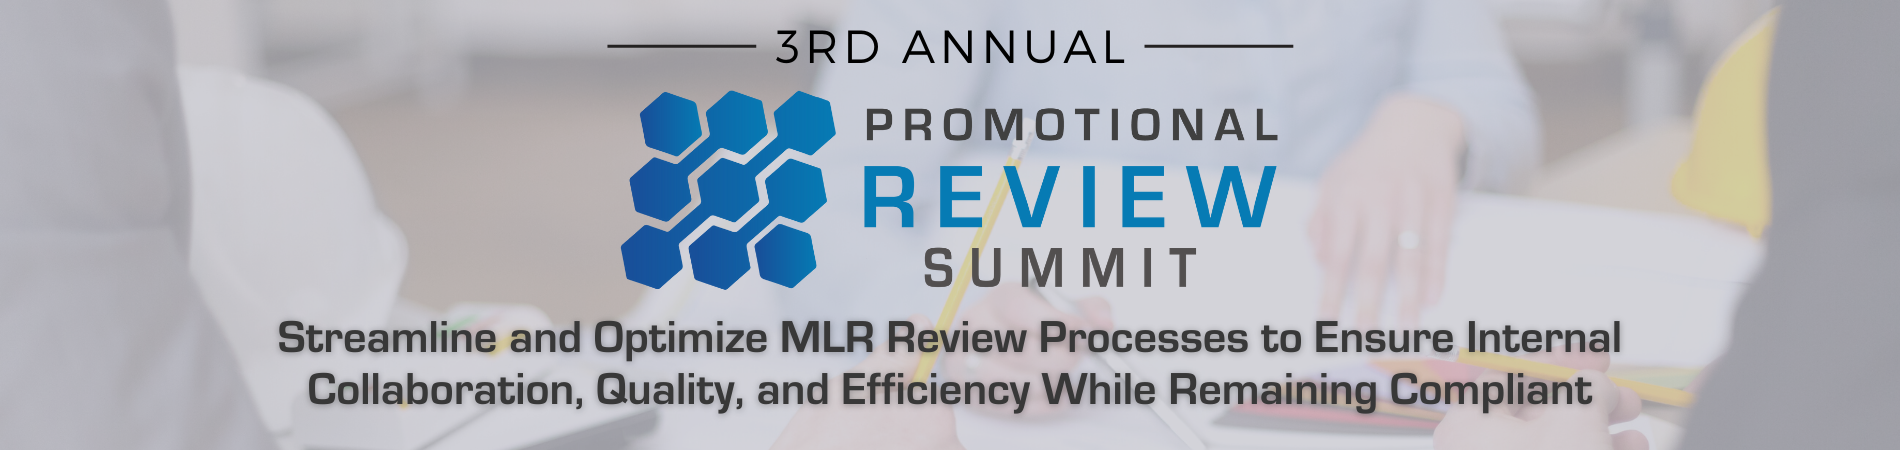 3rd Annual Promotional Review Summit